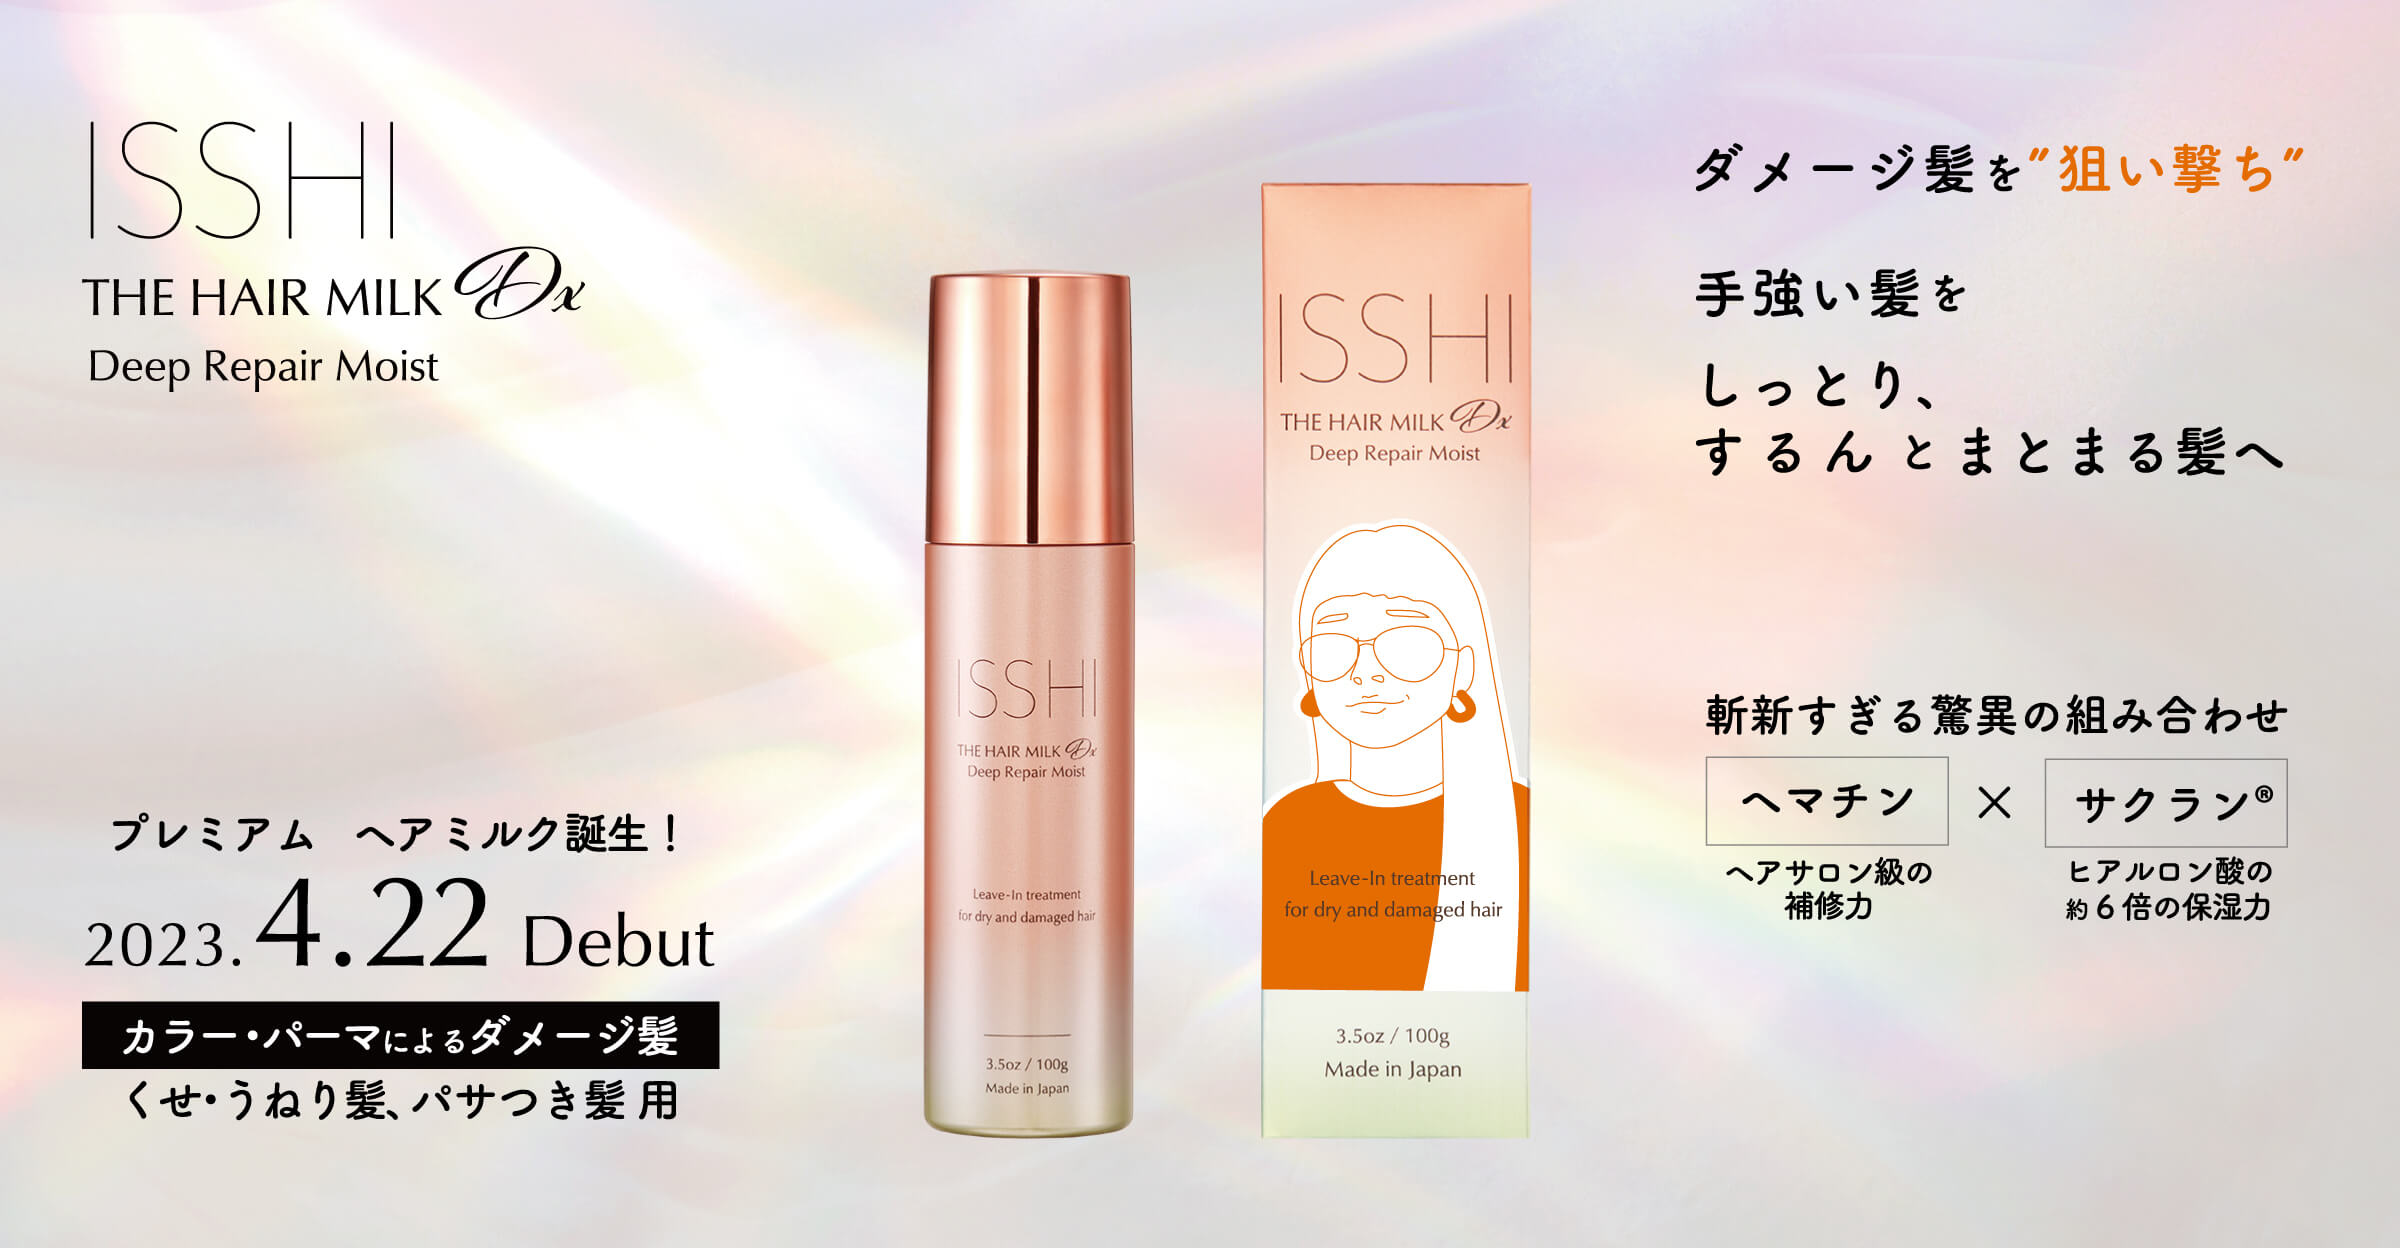 ISSHI OFFICIAL SITE